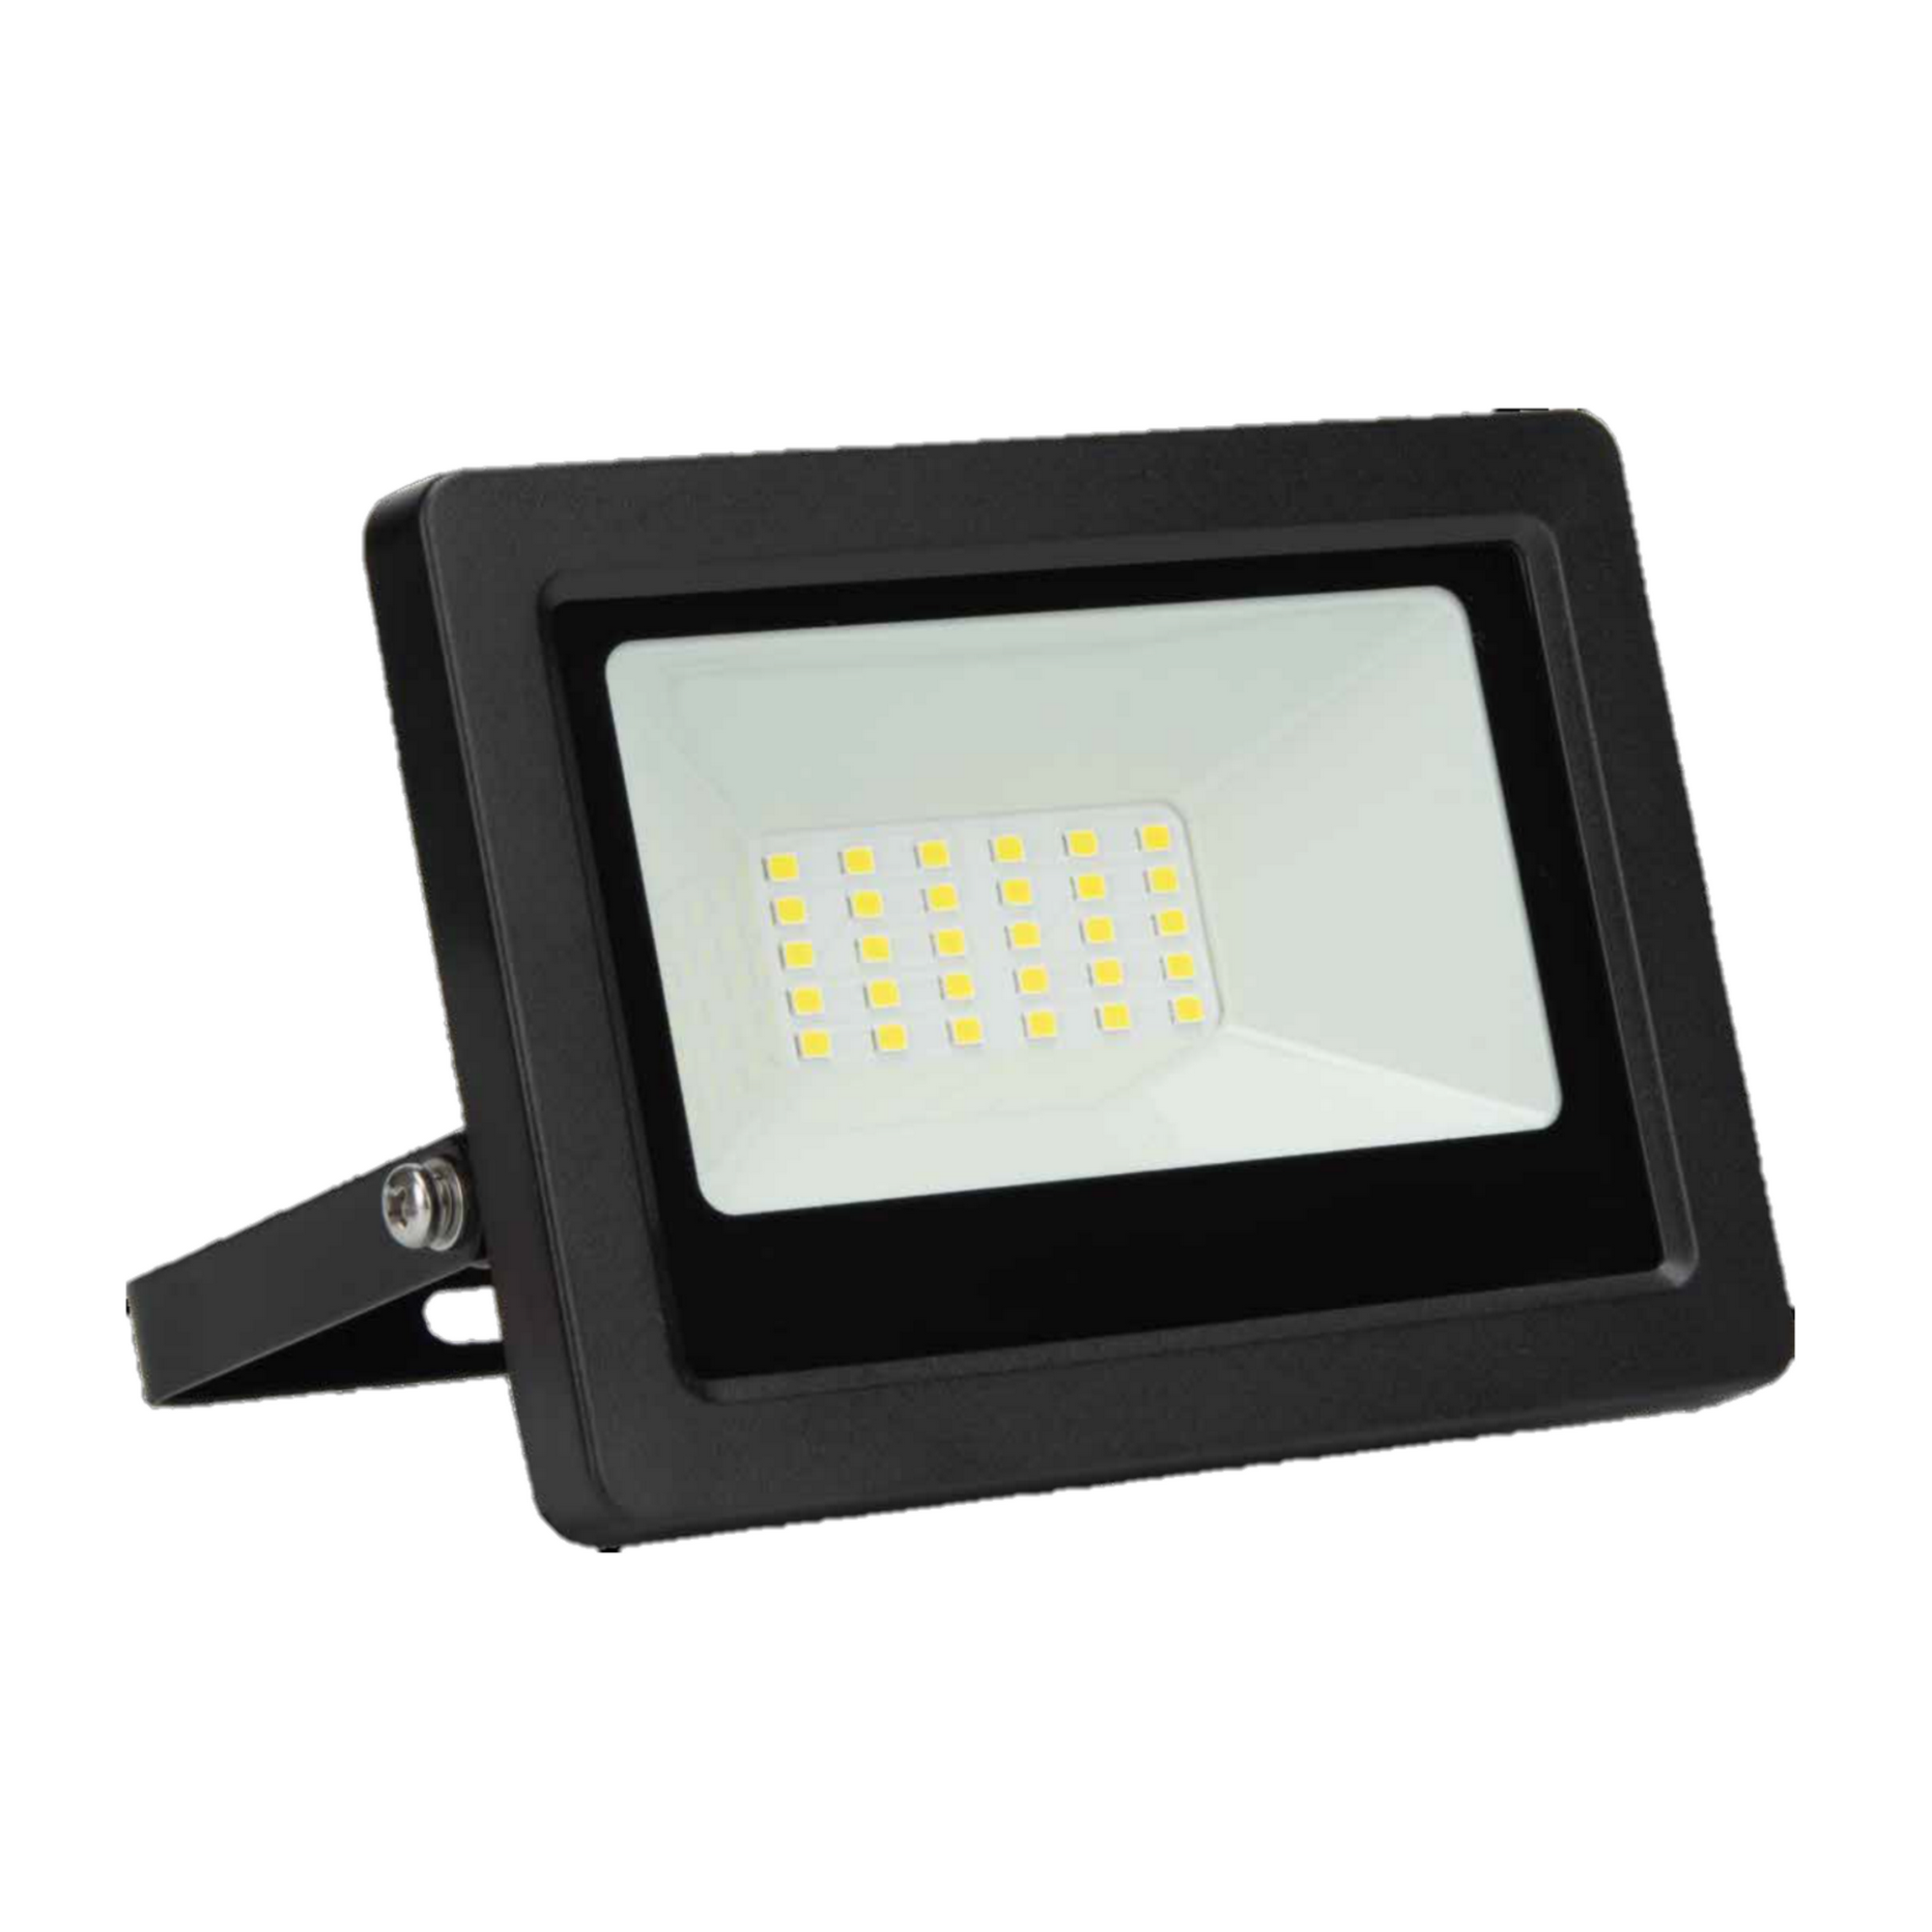 LED-Wandfluter schwarz 20 W 1450 lm + product picture